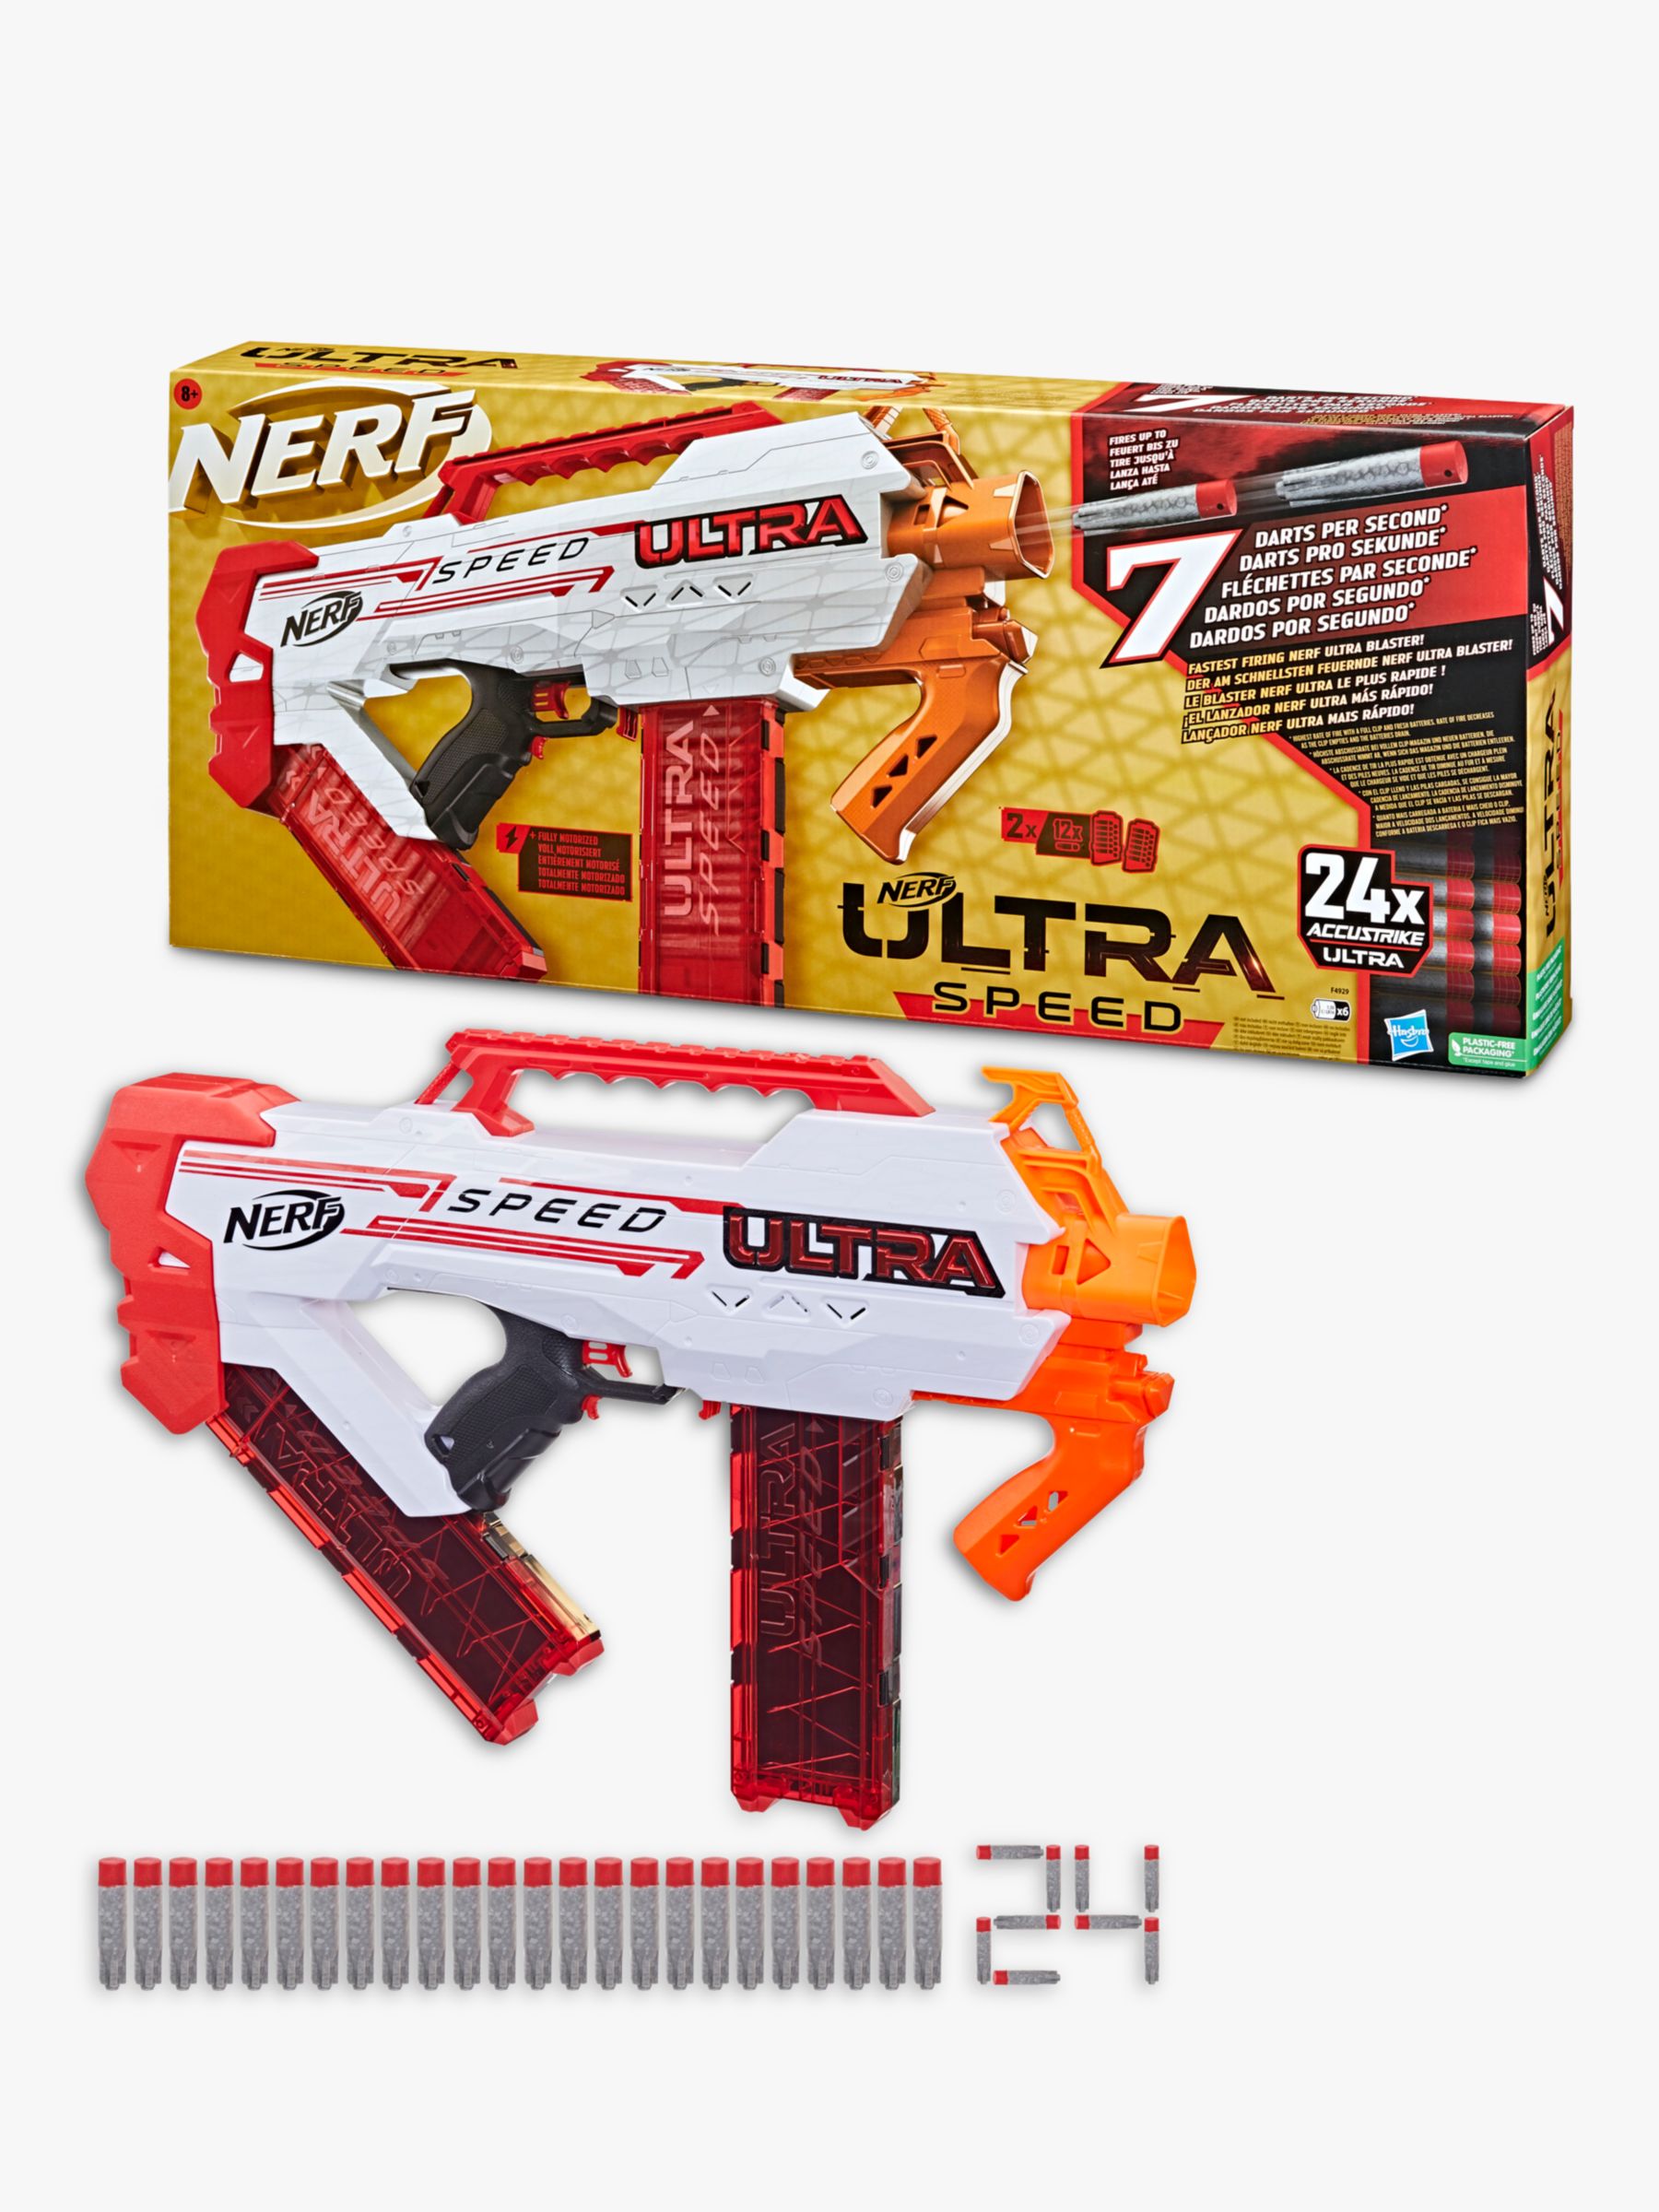 Is it just me or is the Nerf Ultra Speed really cheap for such a